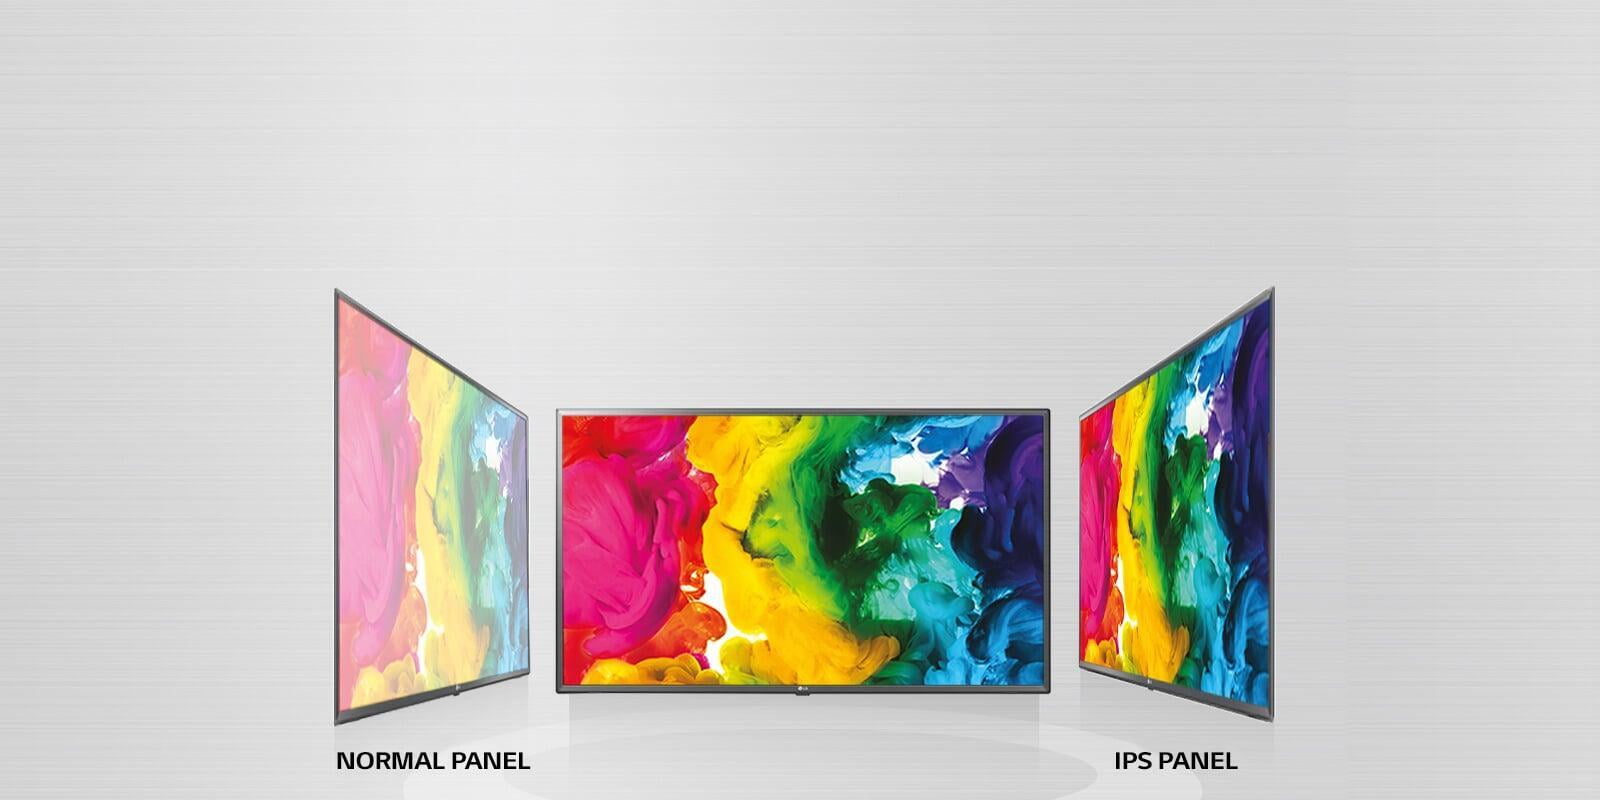 IPS Display The IPS Panel maintains color vibrancy all across the screen and from wide angles.